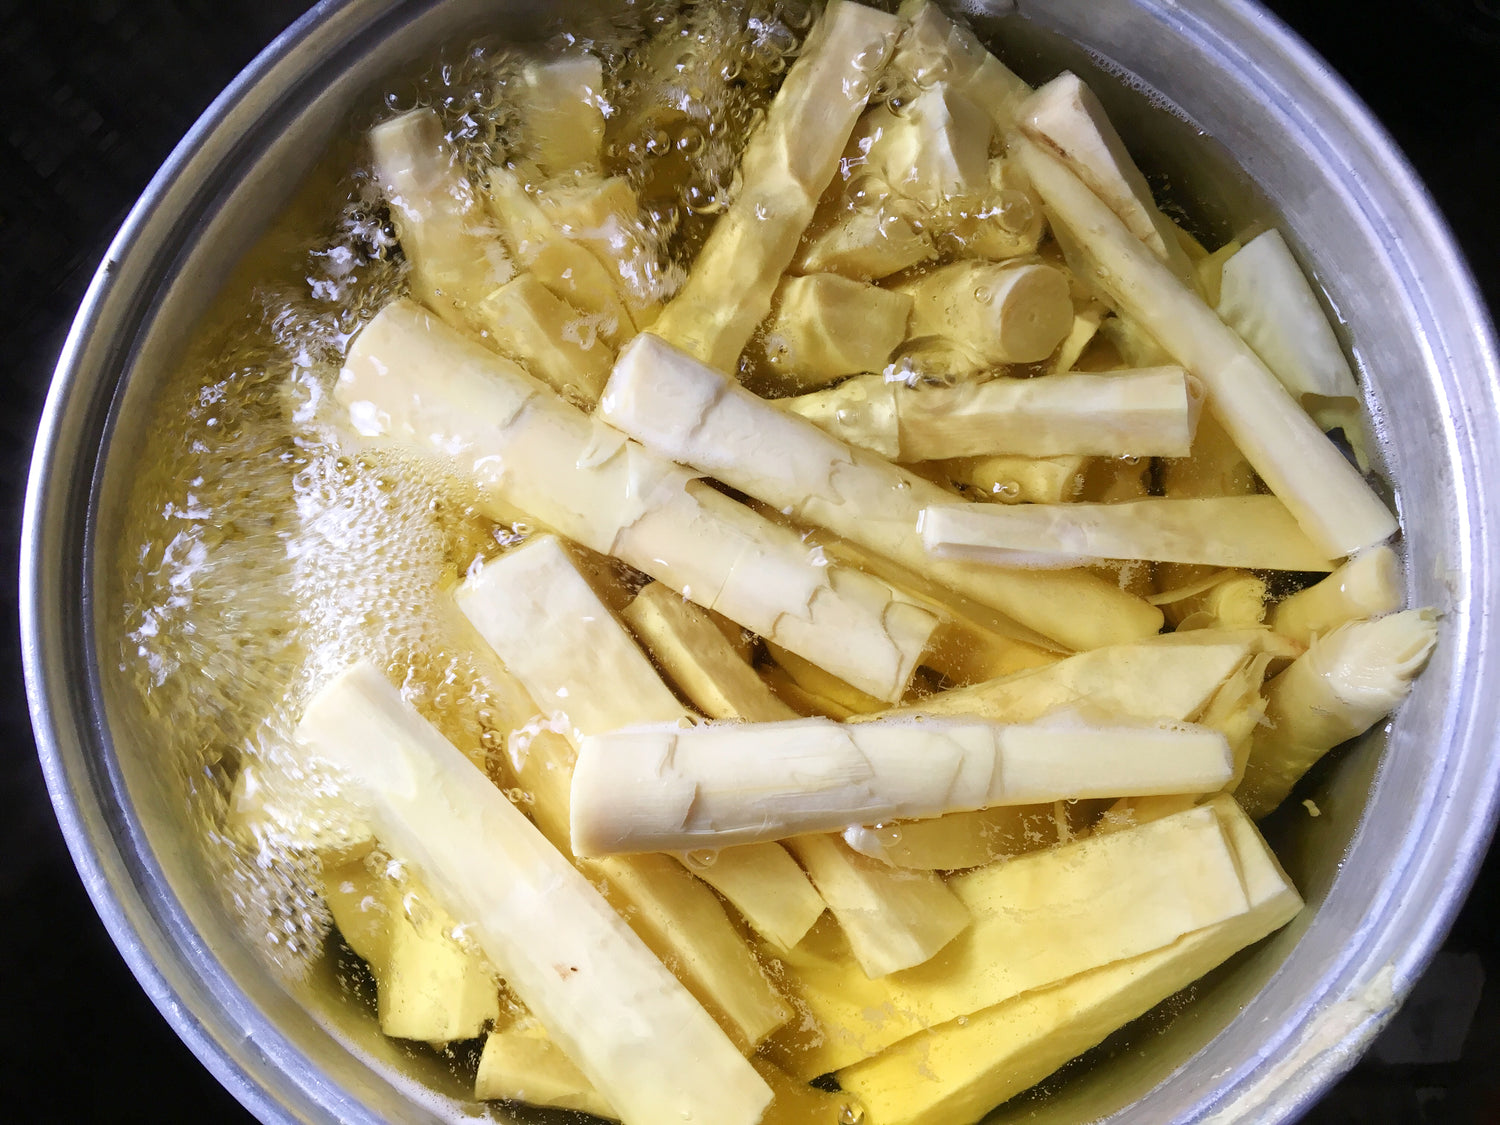 Small bamboo shoots boiling in a pot of water